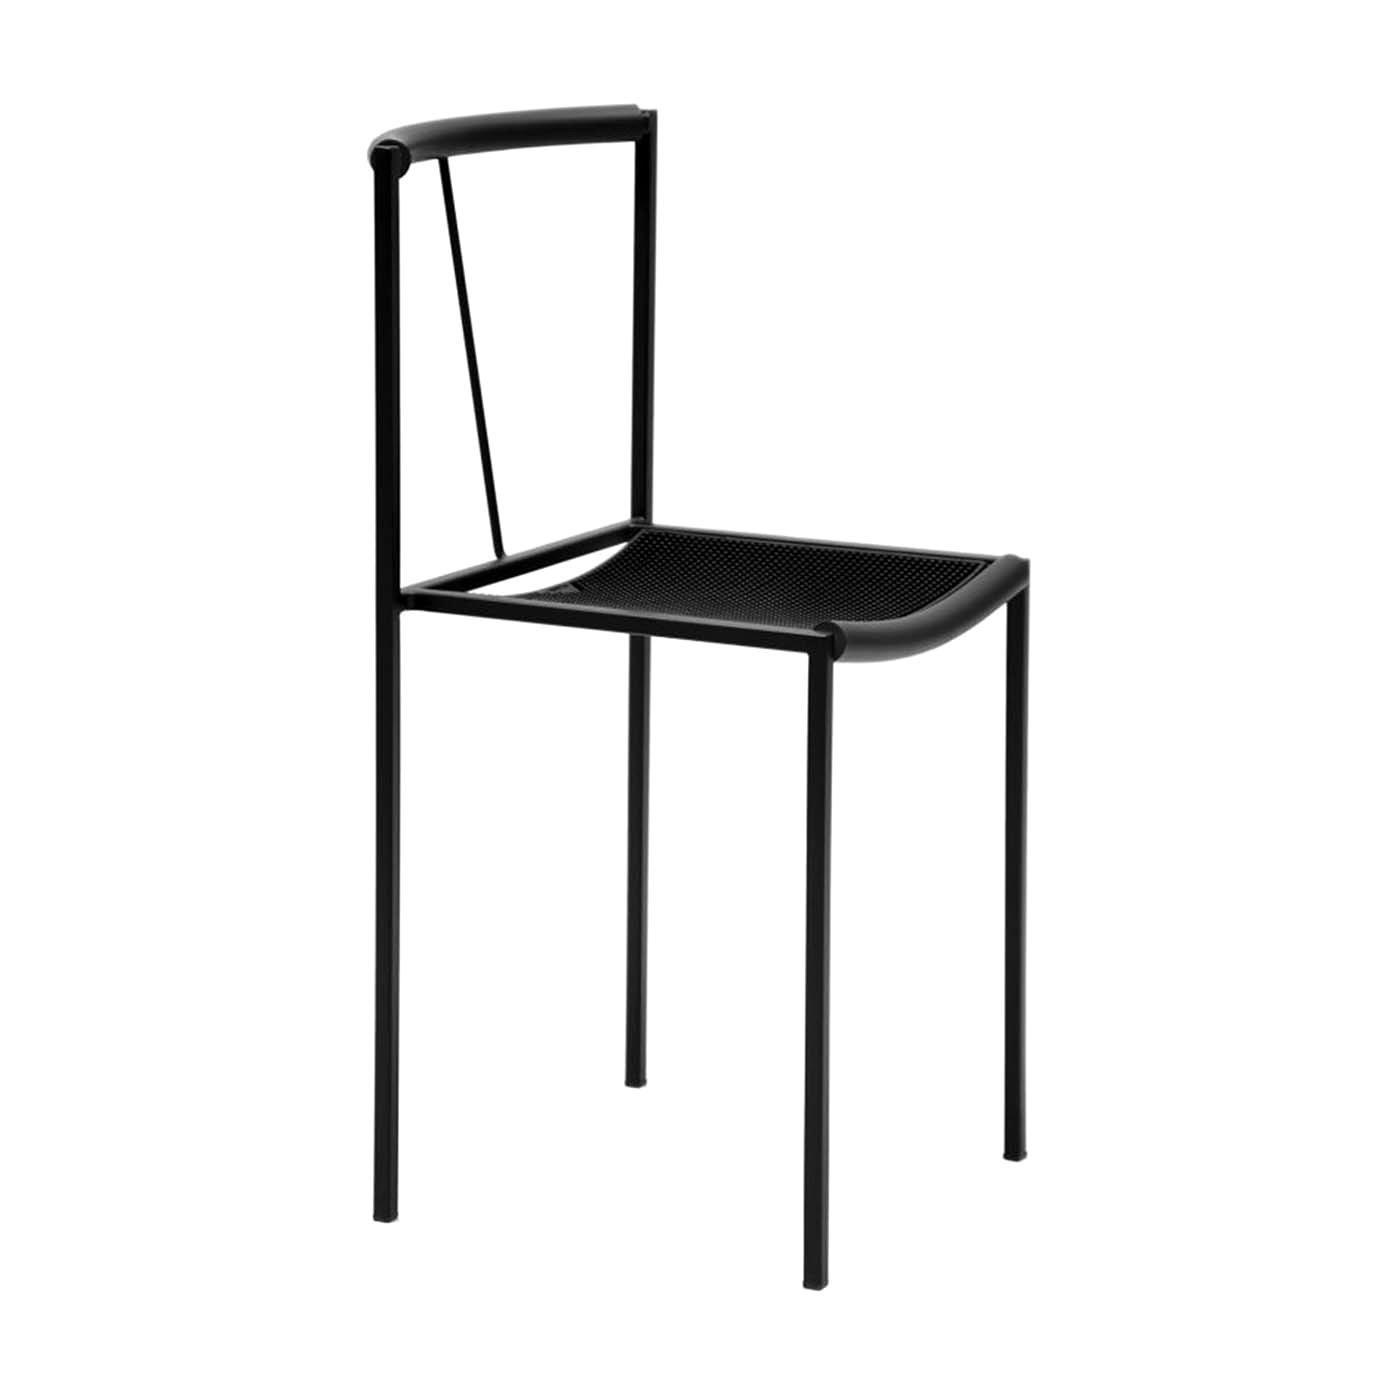 Set of 4 Chairs by Maurizio Peregalli